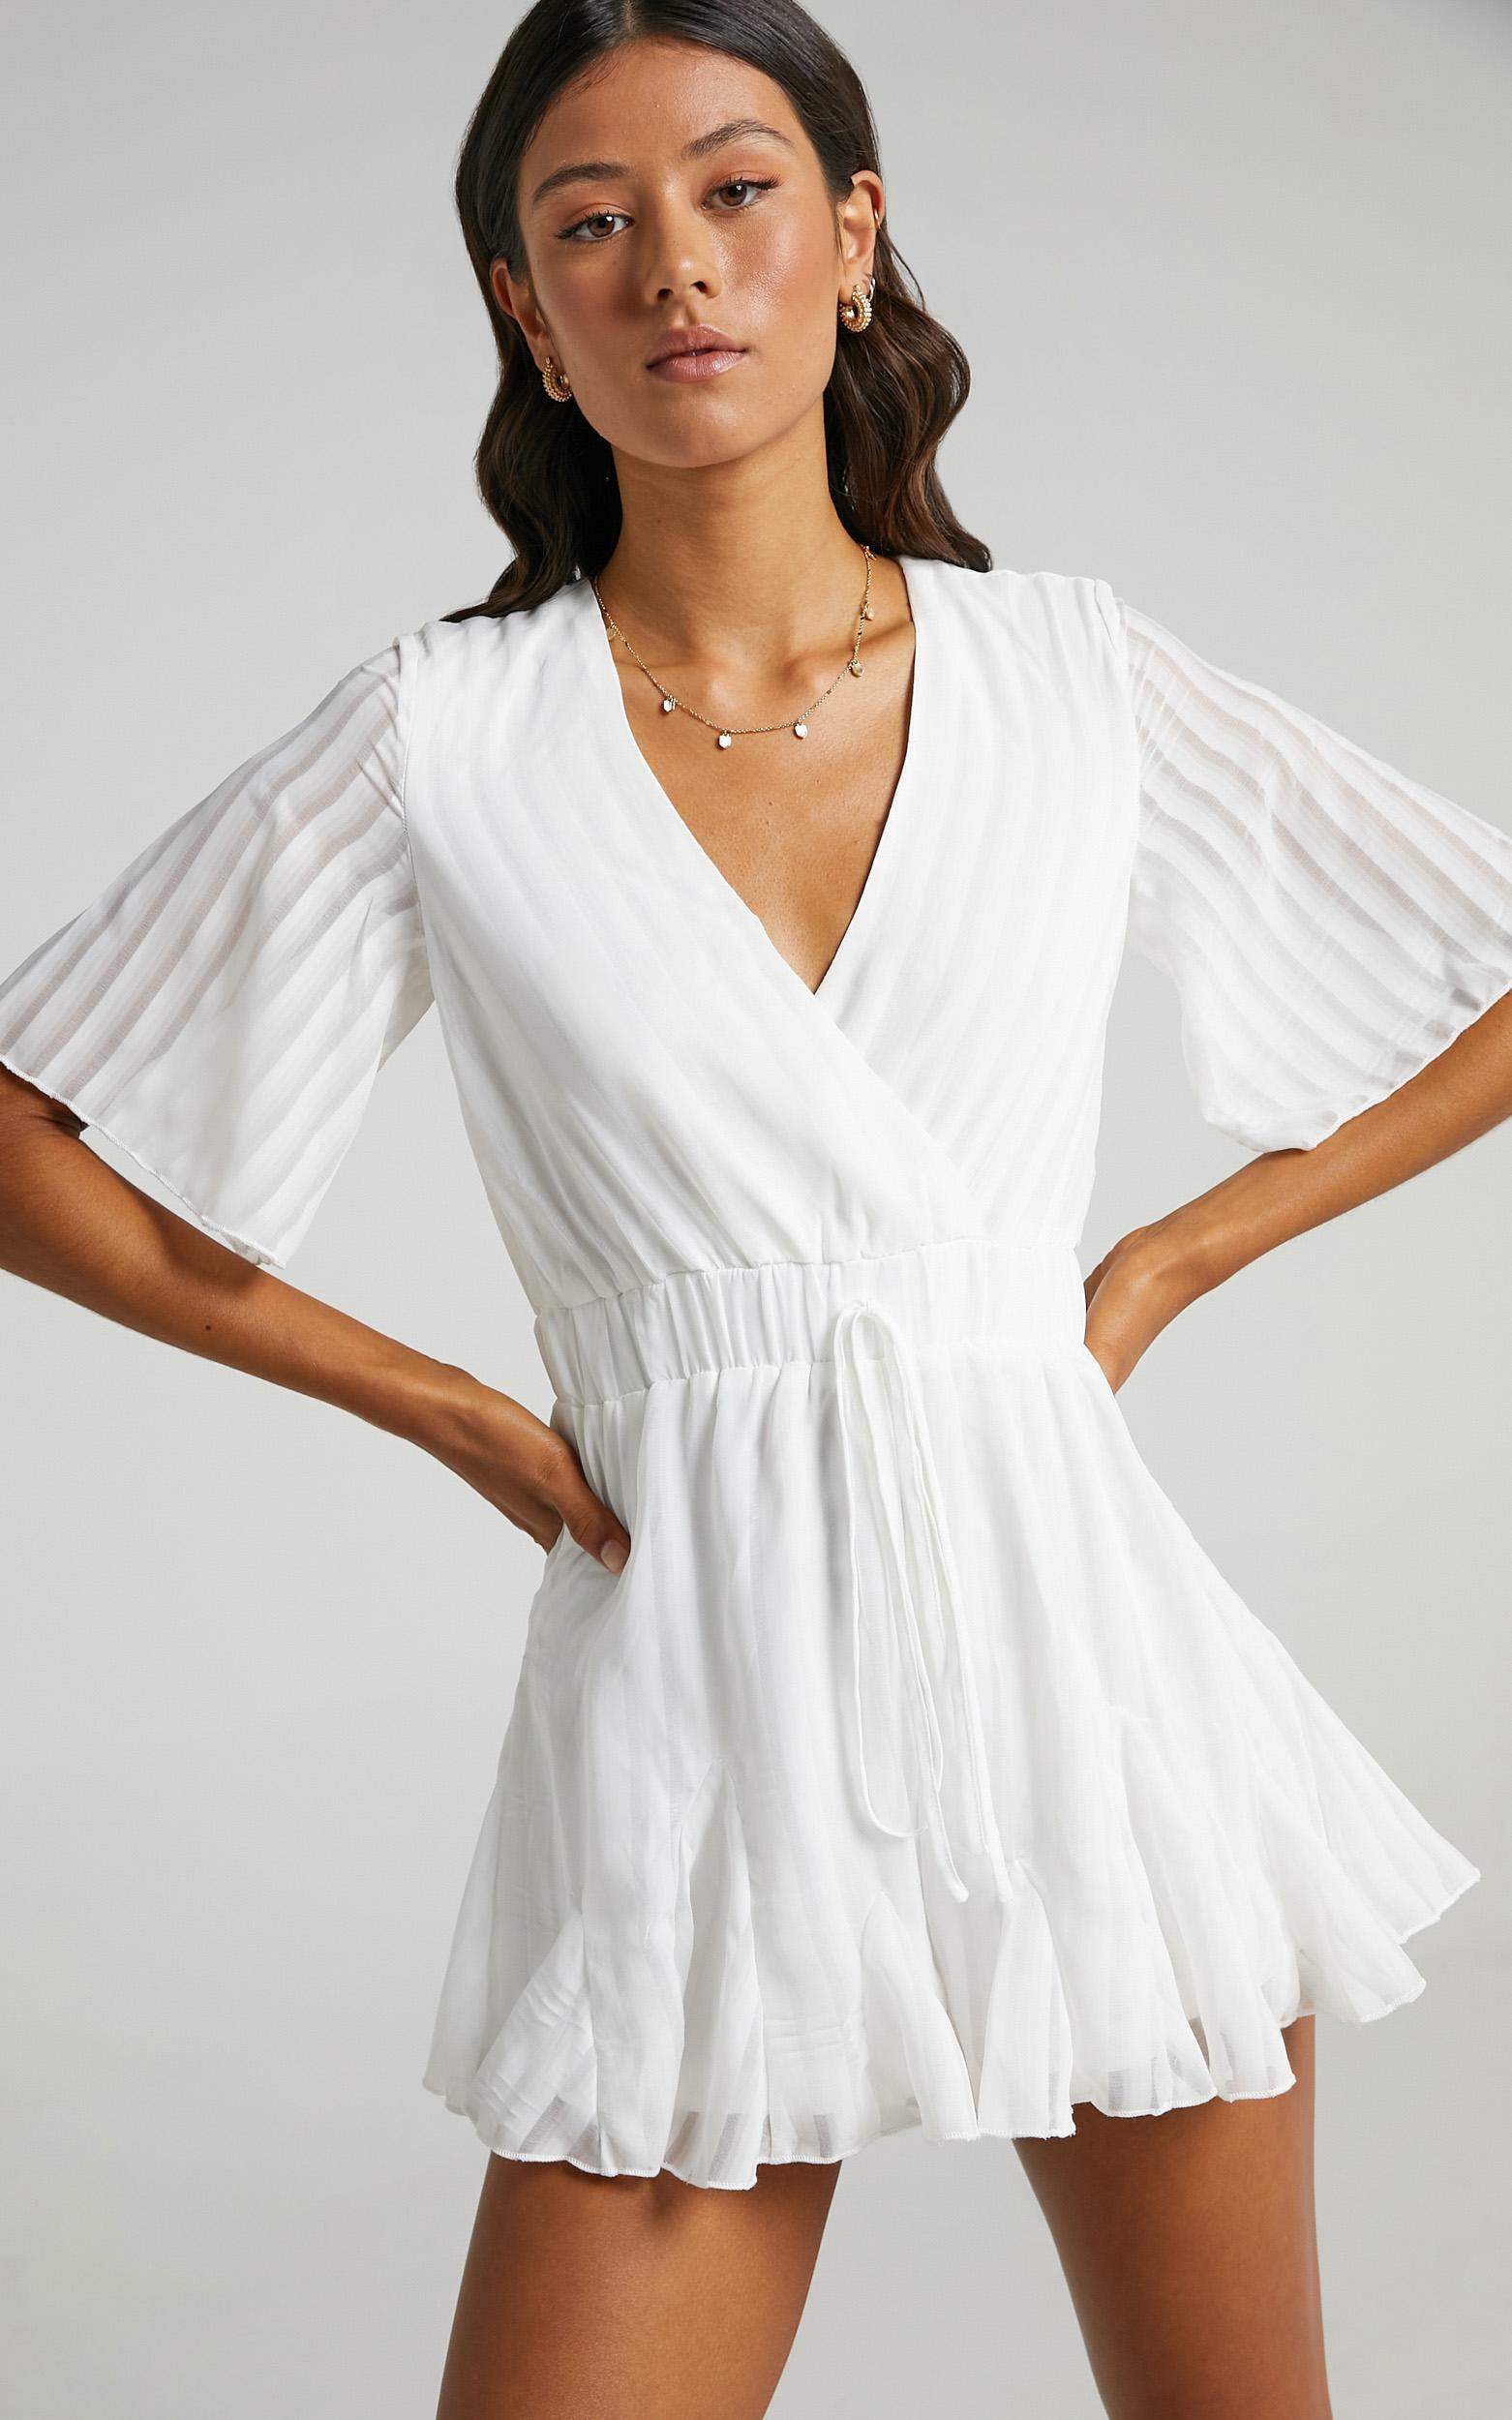 Play On My Heart Playsuit in White - 06, WHT5, hi-res image number null